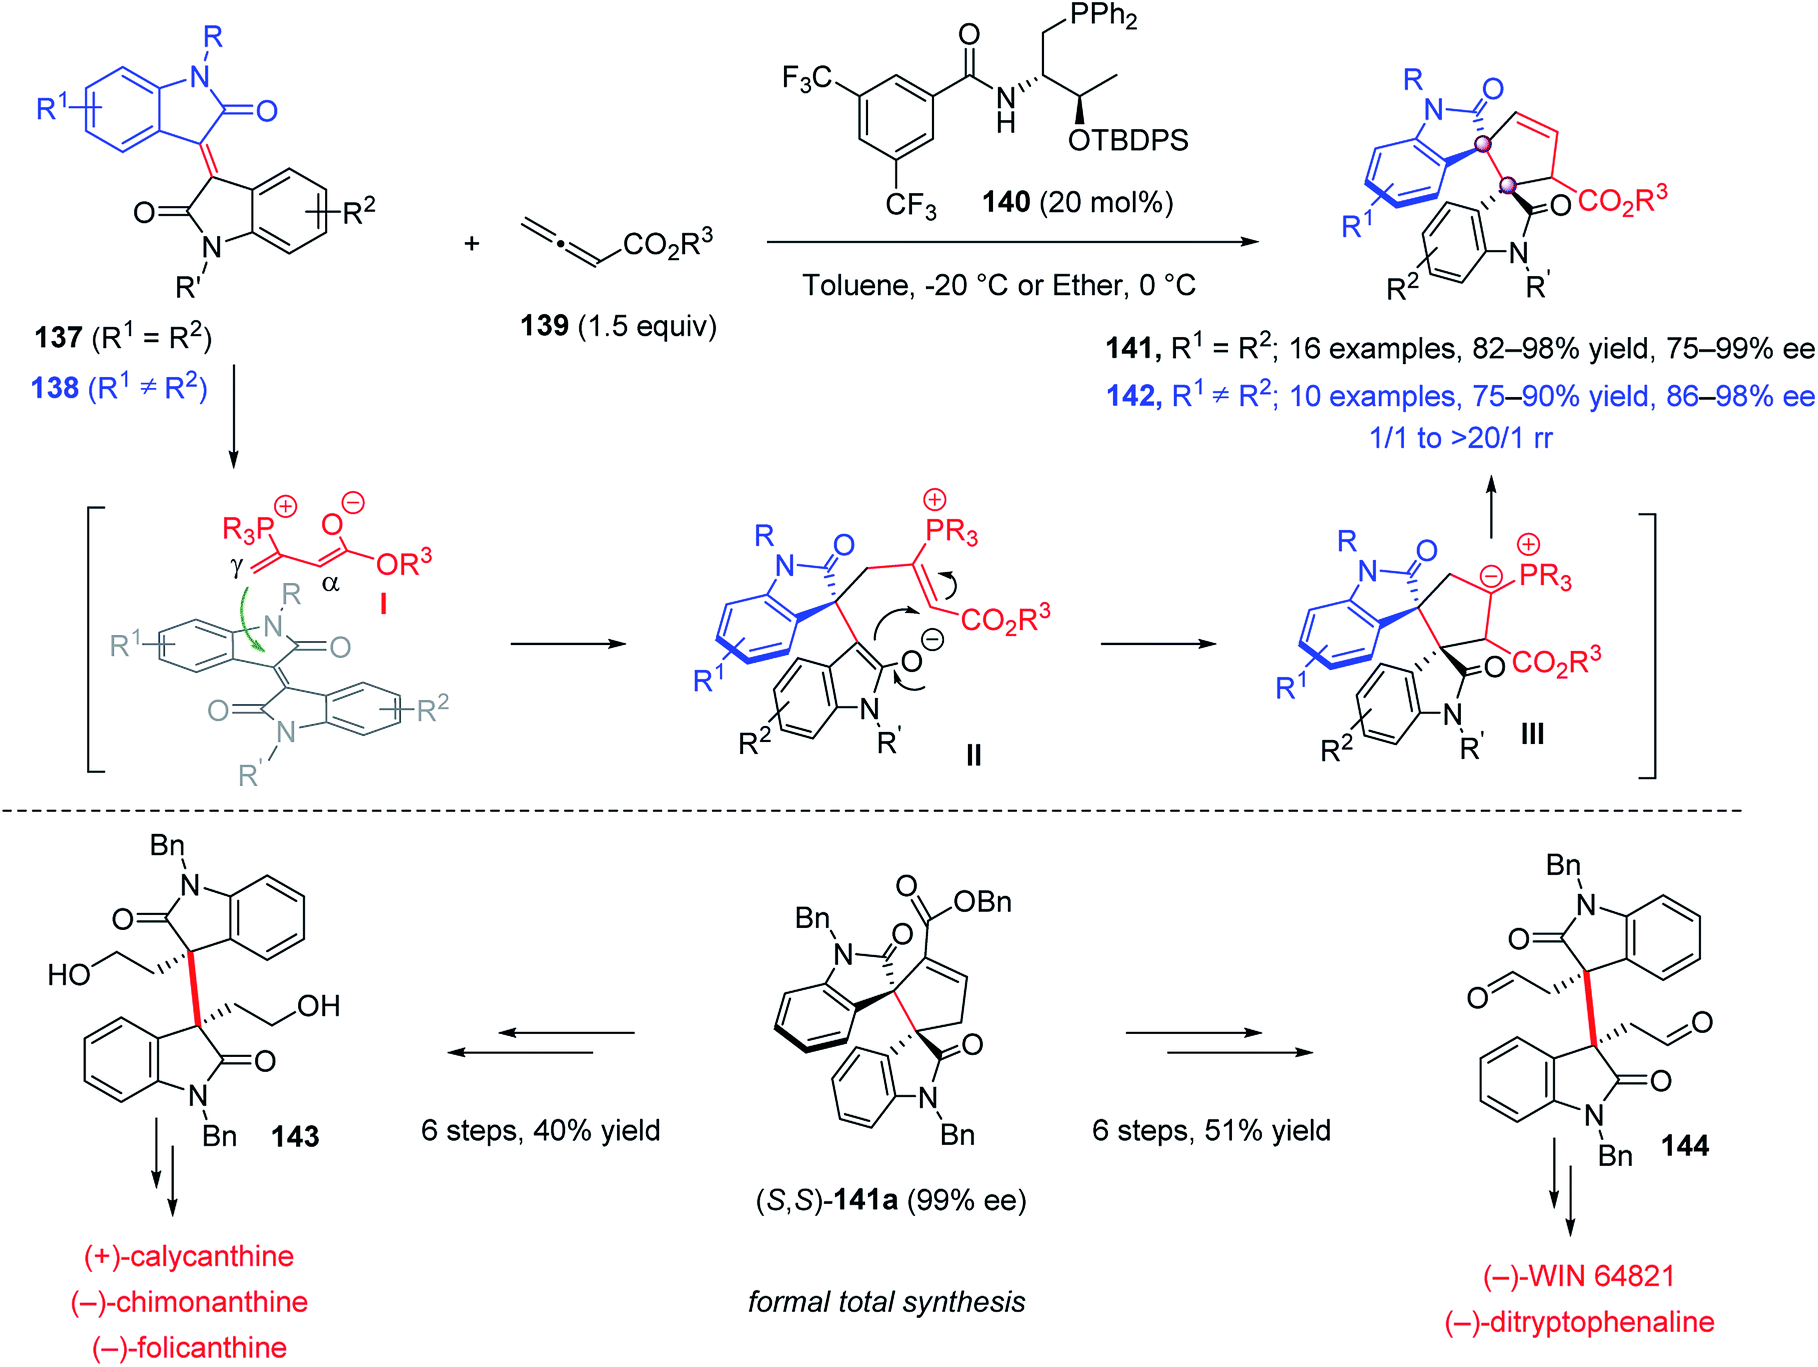 Catalytic Enantioselective Construction Of Vicinal Quaternary Carbon Stereocenters Chemical Science Rsc Publishing Doi 10 1039 D0scb